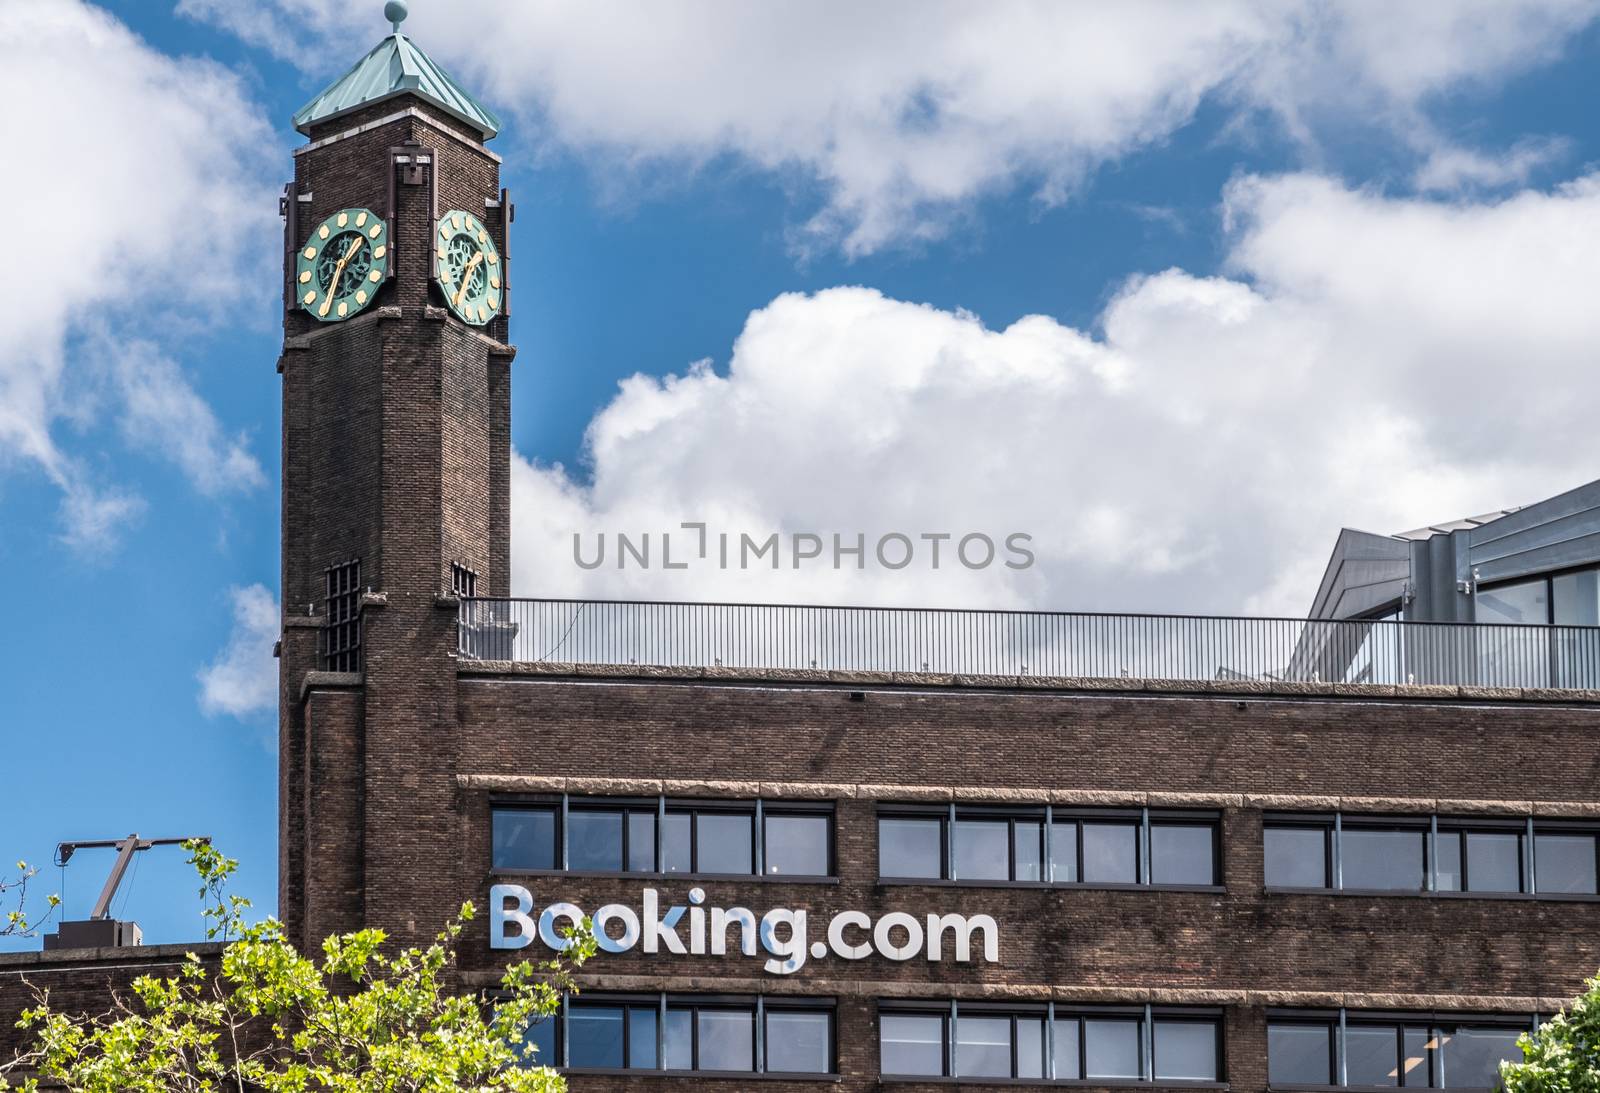 Amsterdam, the Netherlands - July 1, 2019: Rembrandtplein. De dark brown brick office building with clock tower of booking.com against blue sky and white clouds.